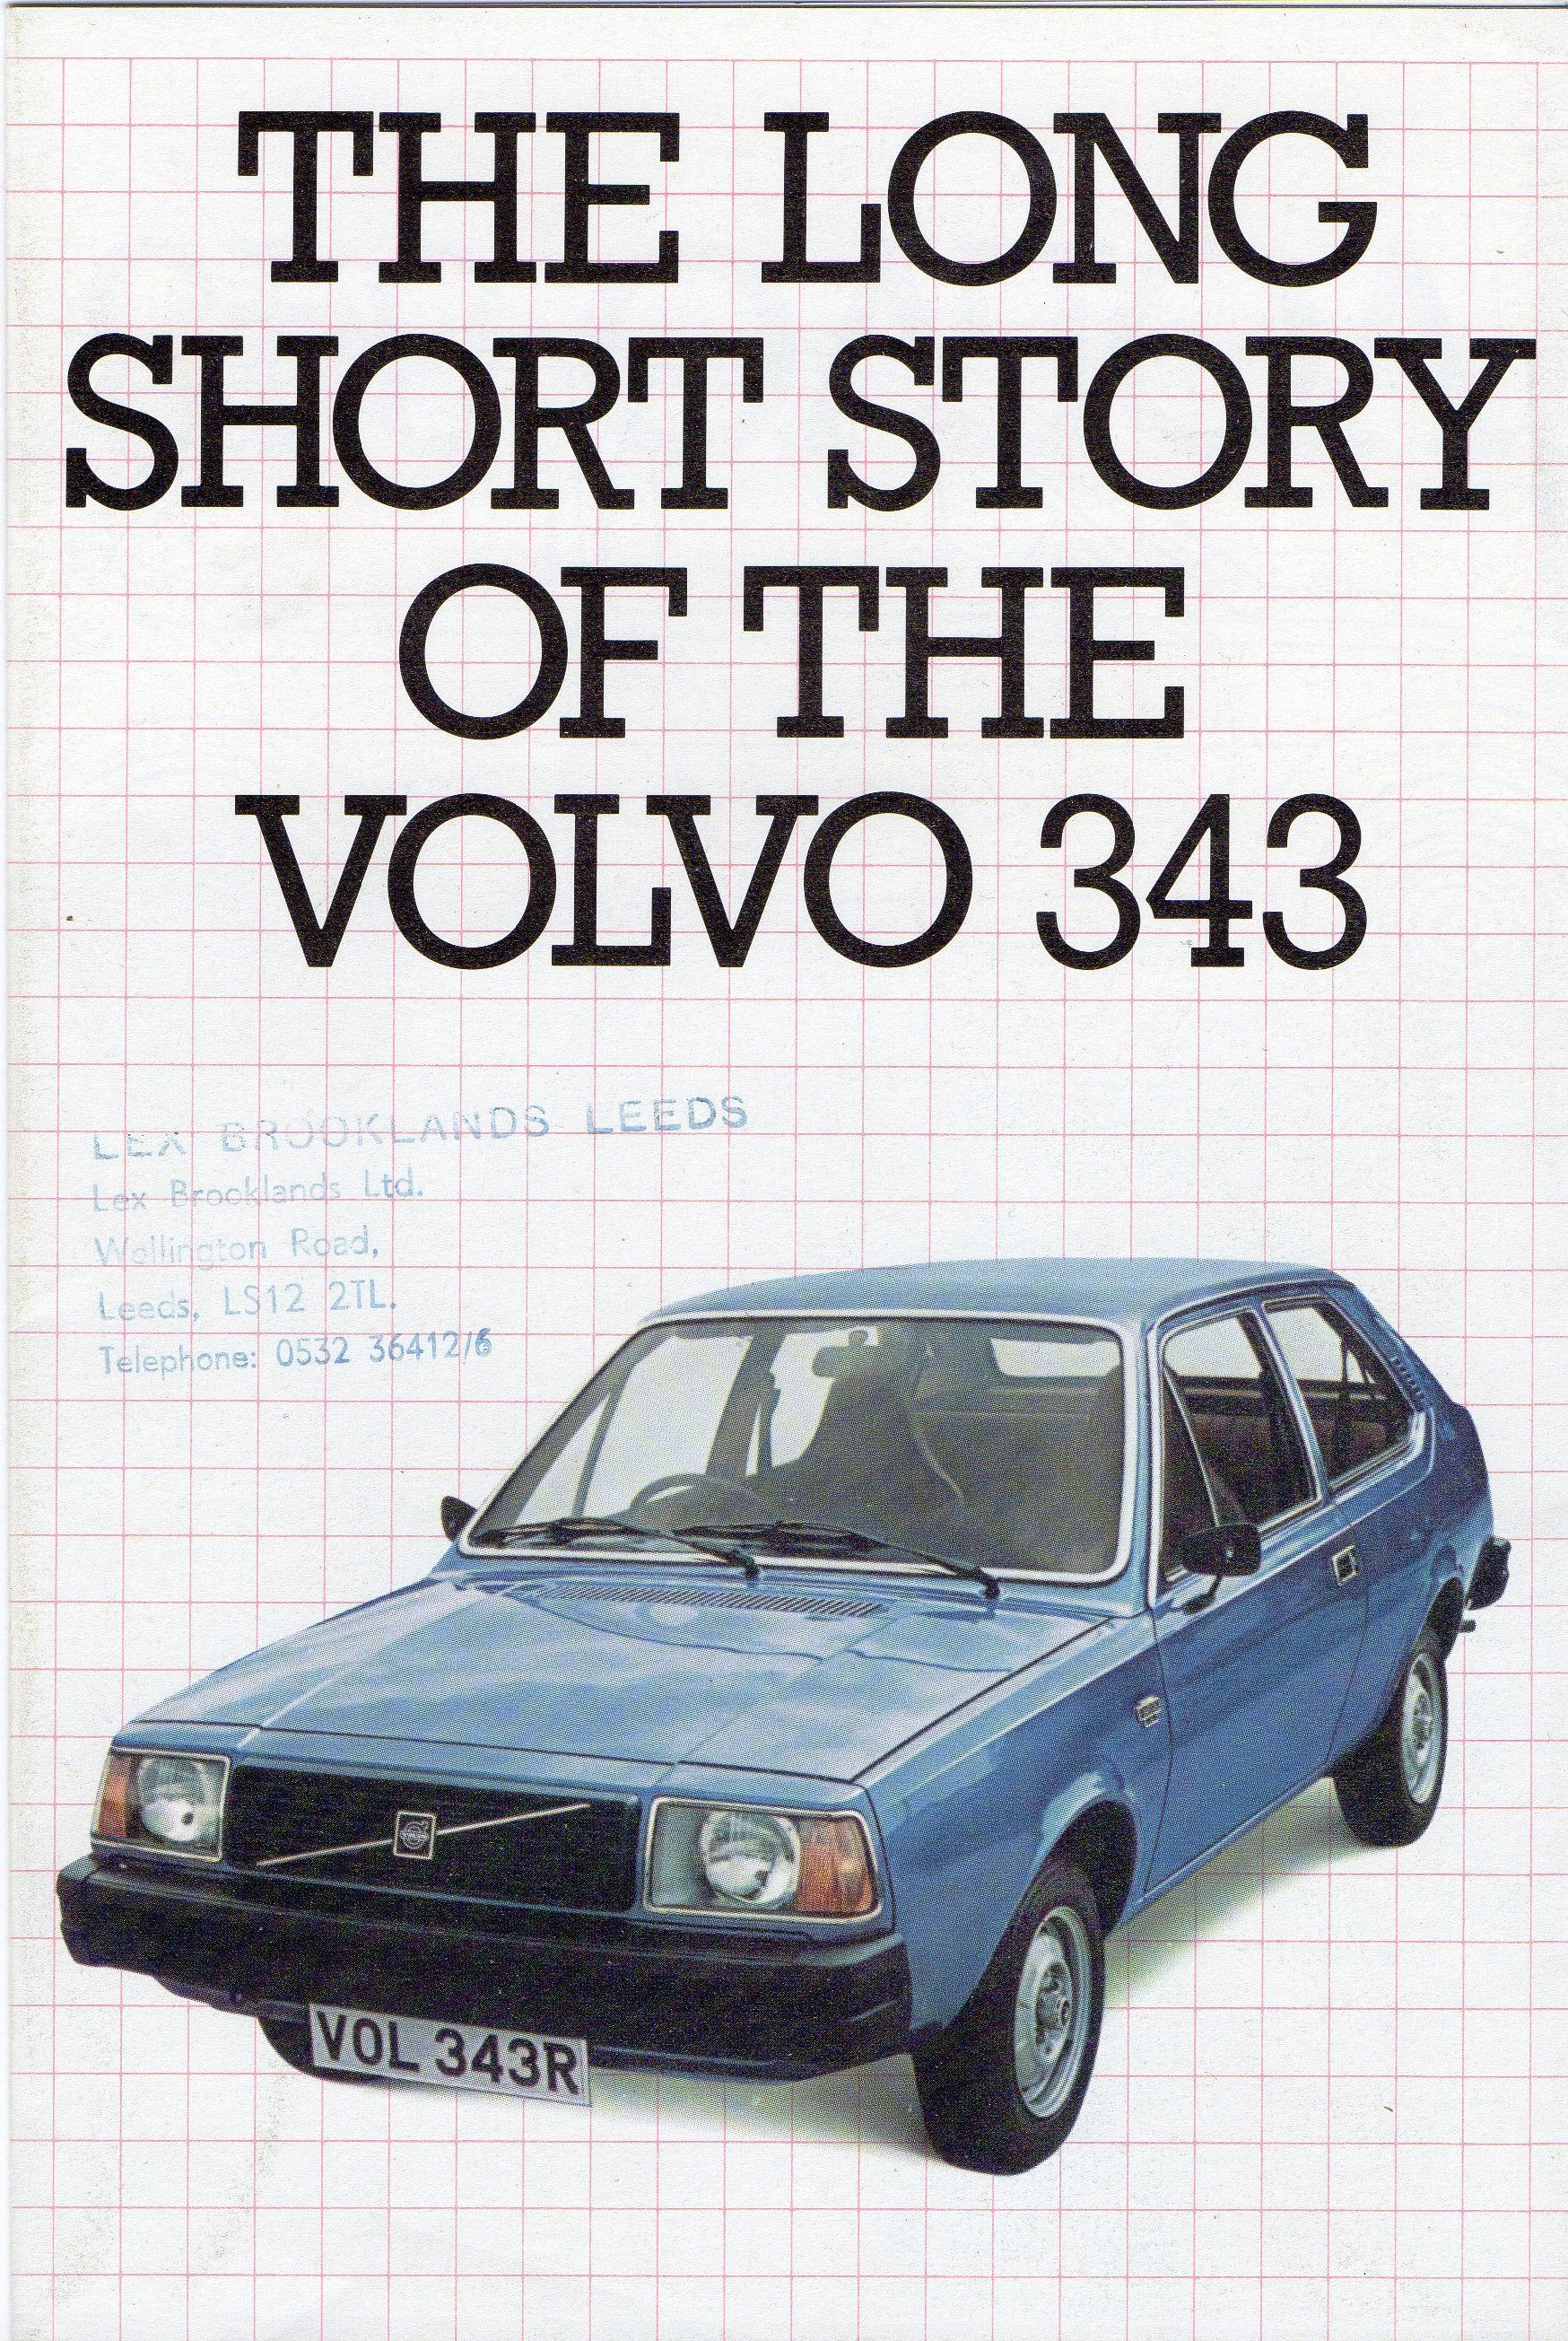 Volvo 343 launch leaflet | Flickr - Photo Sharing!